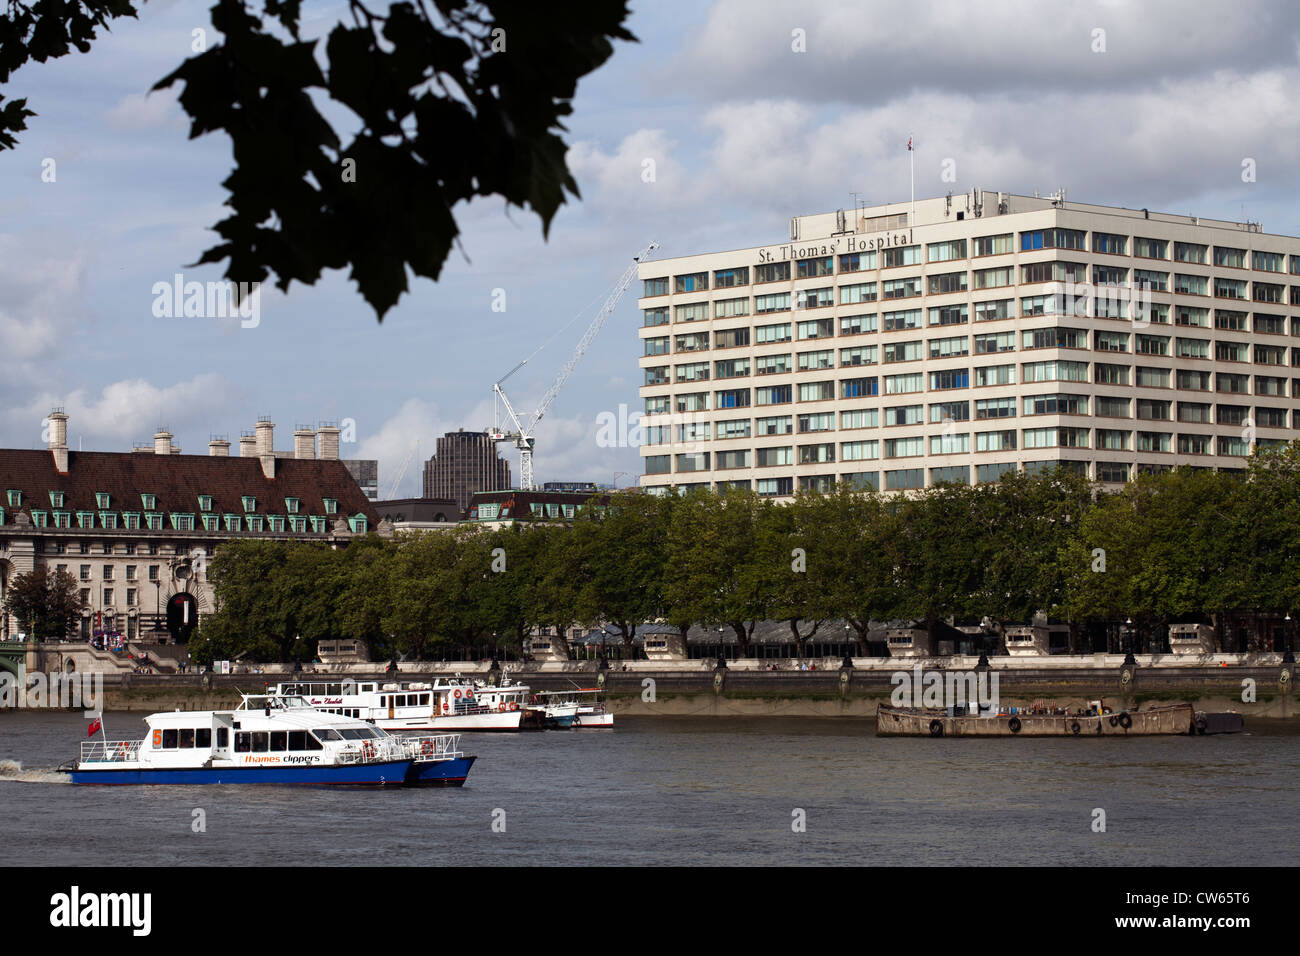 River Thames with some boats and St. Thomas Hospital Stock Photo